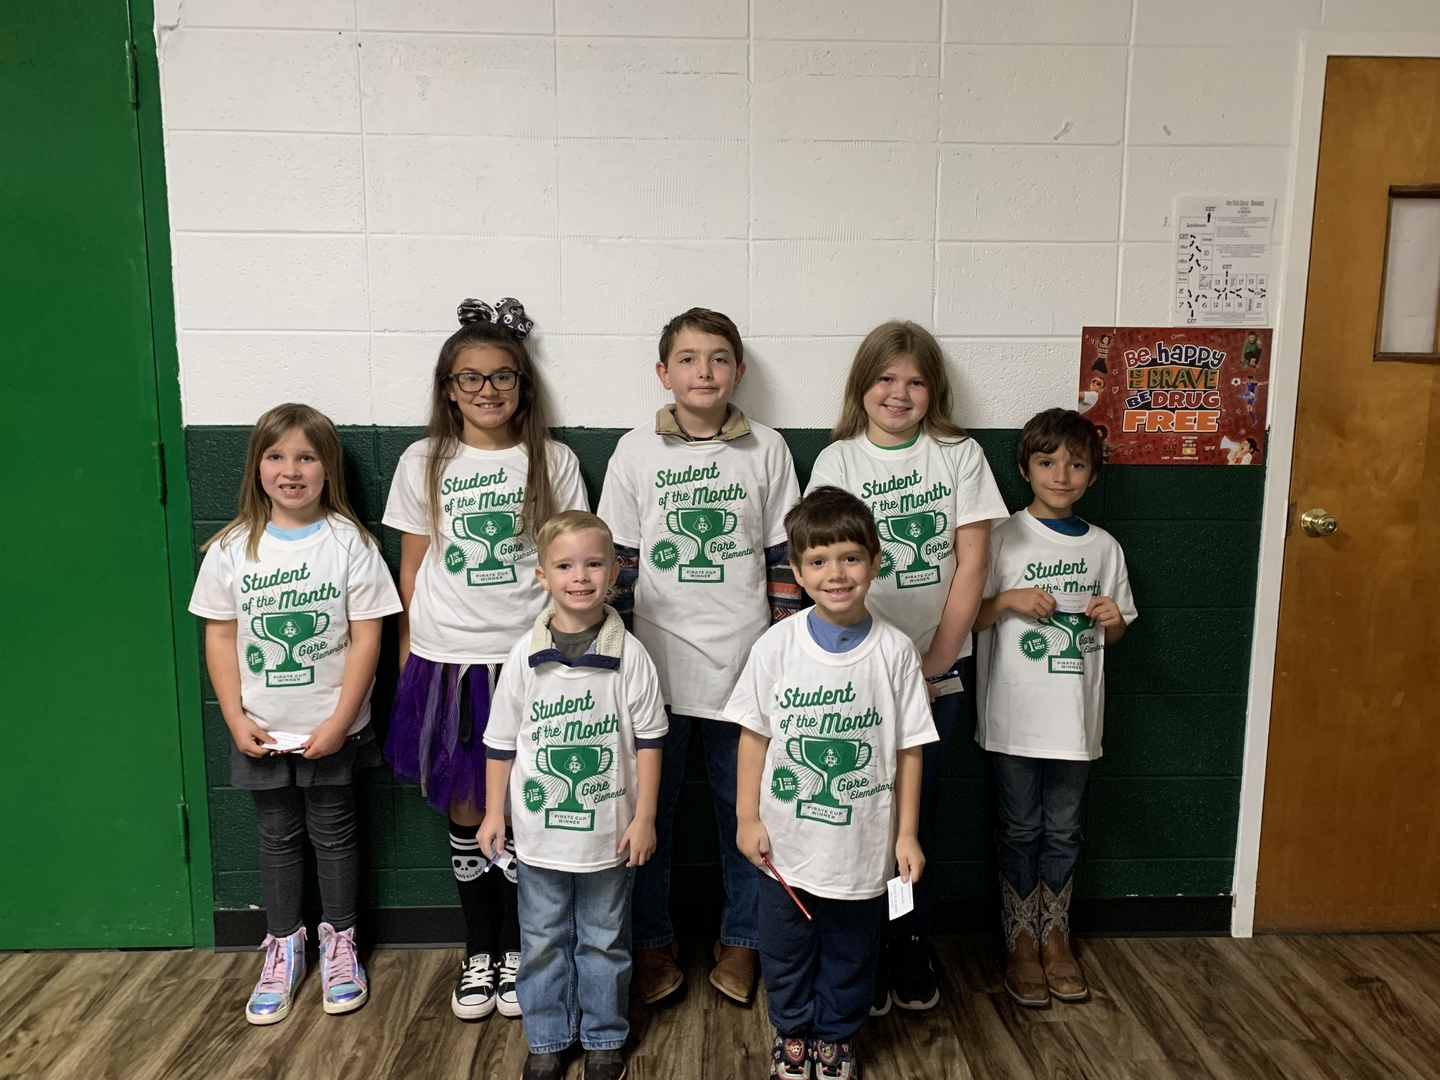 September 2022 Students of the Month   BACK ROW L-R  1ST - ELLA LEA 4TH - BLAKELEY MARSH 5TH - CODY SMITH 3RD - HADLEY SMITH 2ND - CONNER GALLOWAY  FRONT ROW L-R  PK - BENSON ORWIN  KG - MADDOX BENNETT 